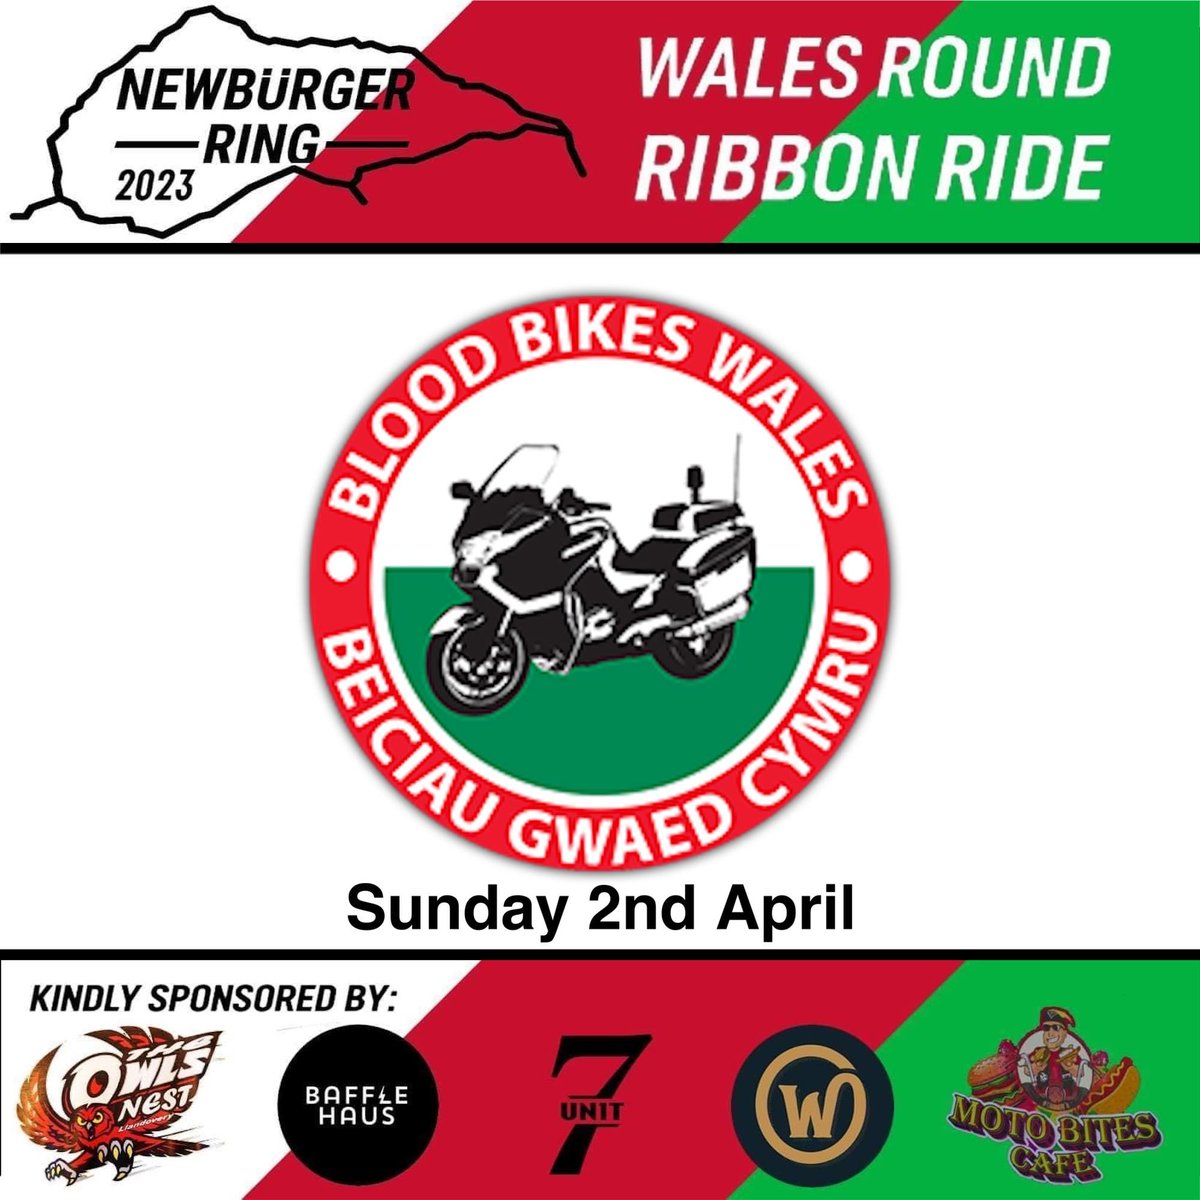 Blood Bikes Wales would like to thank the organisers of the Wales Round Ribbon Ride, which was such a resounding success yesterday. (1/3)